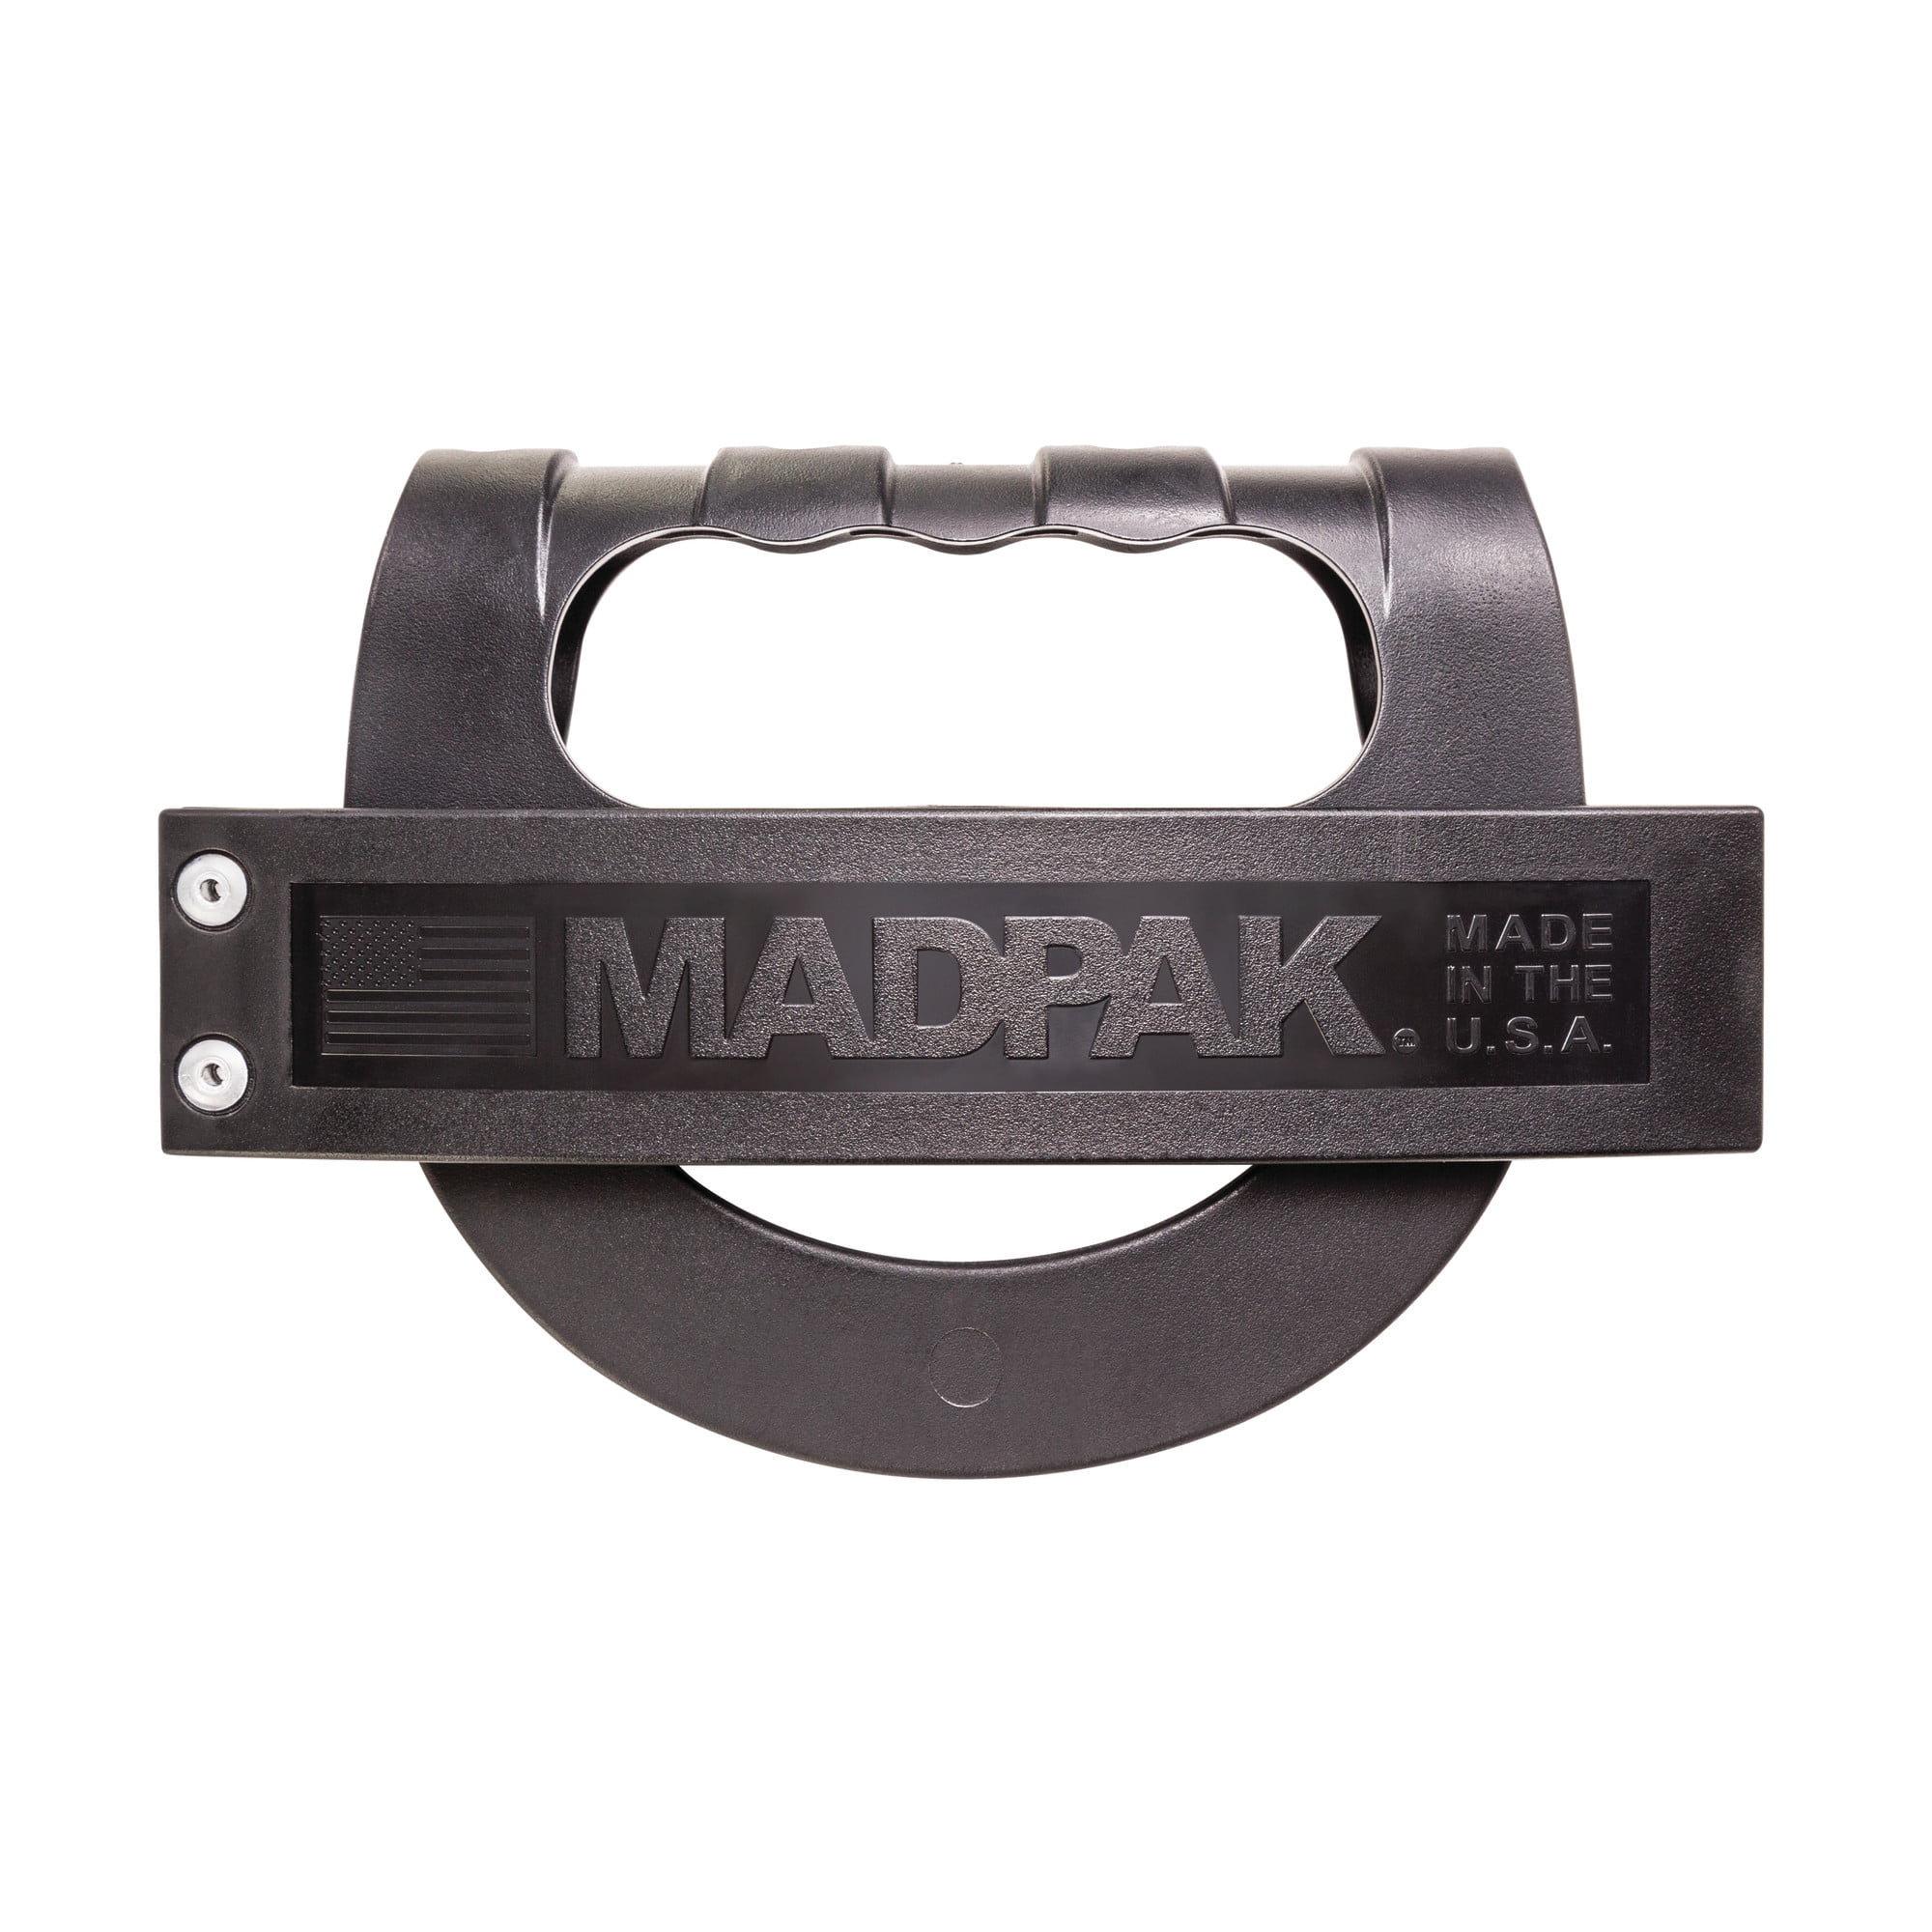 MadPak Belt Clip - Add a clip and handle to your favorite Pouch